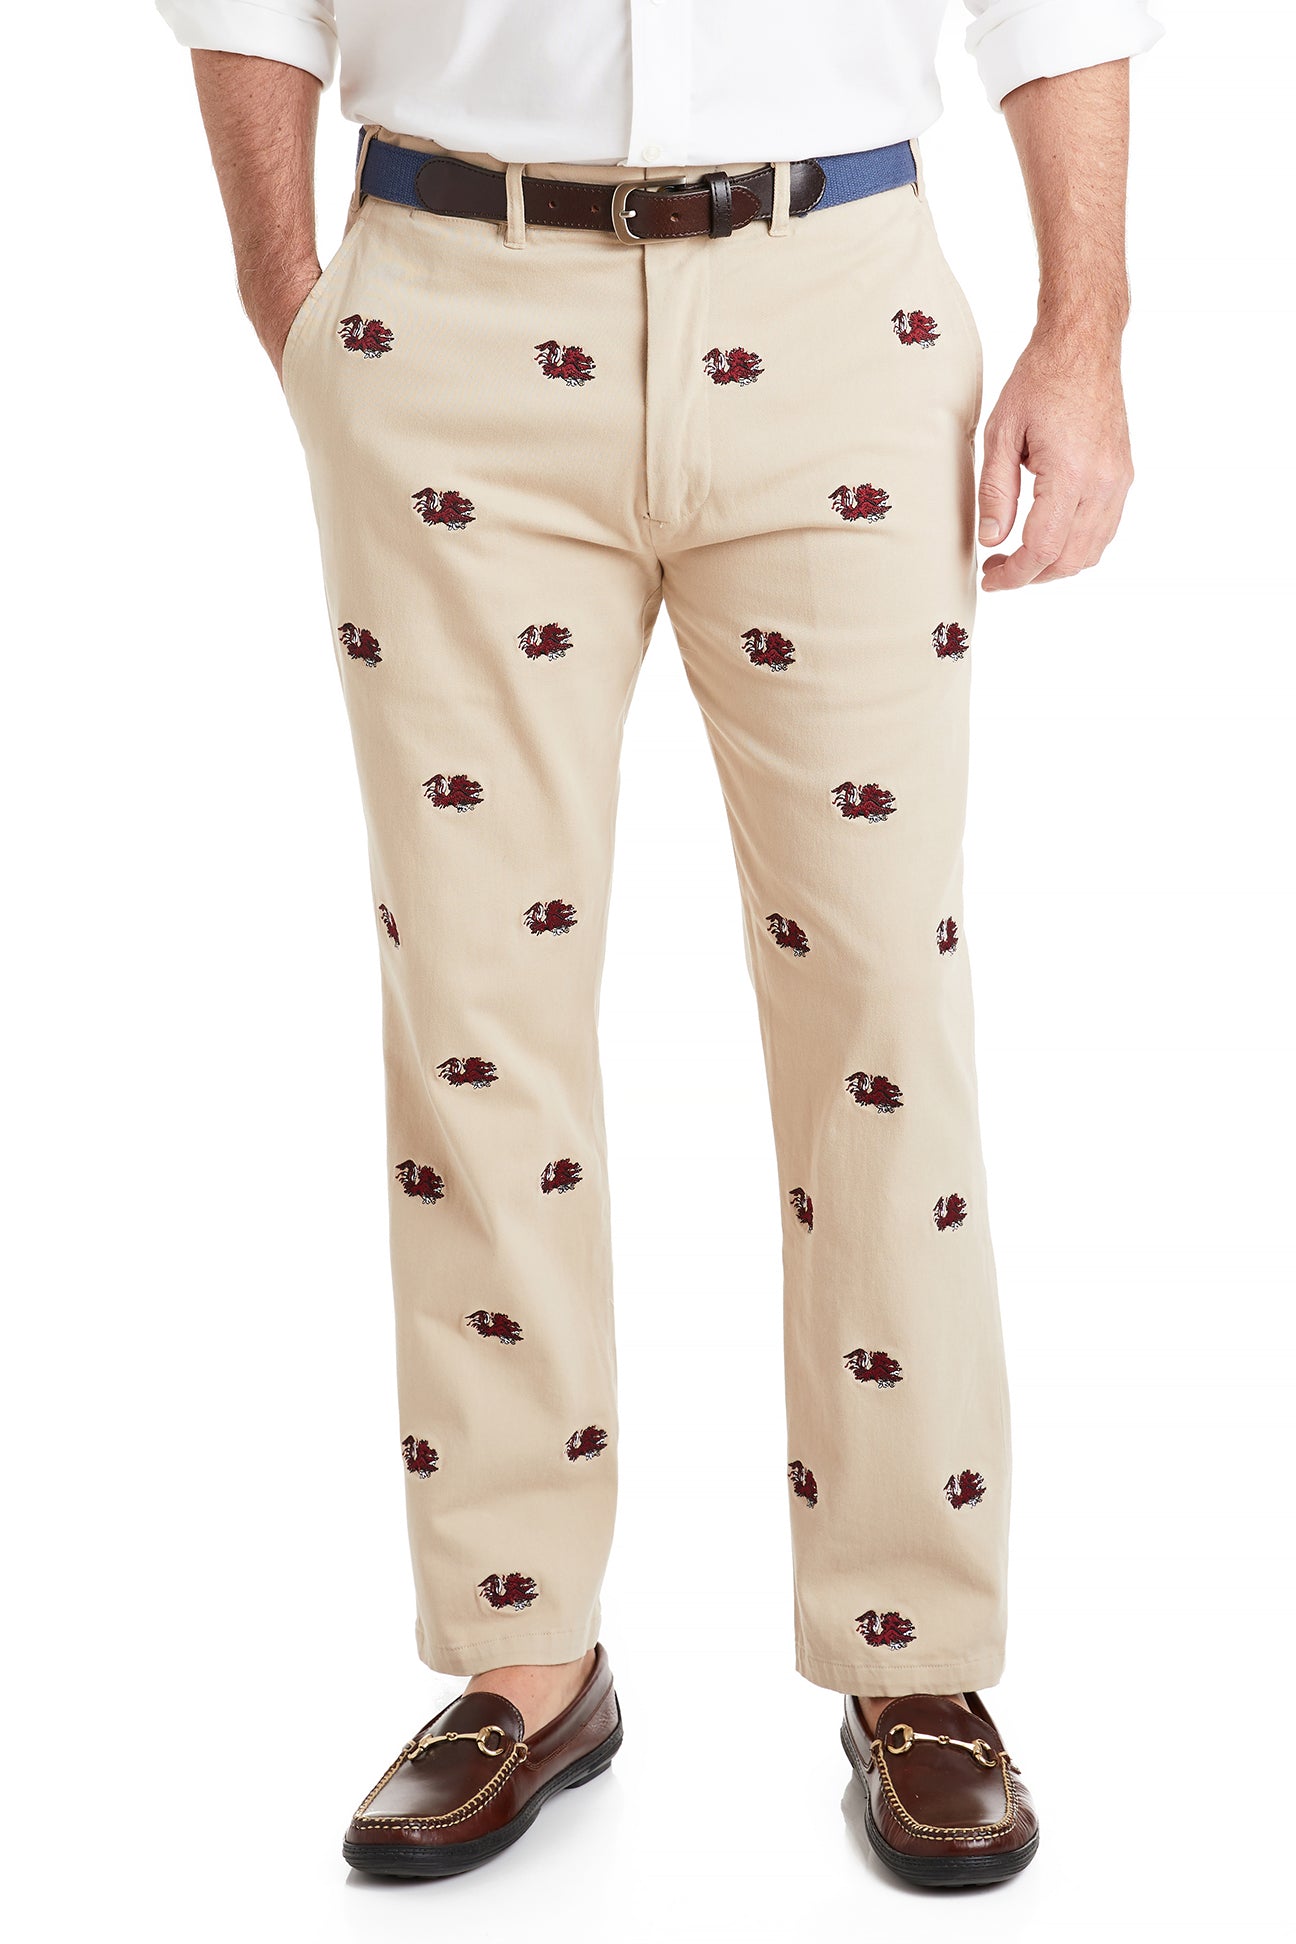 Collegiate Stretch Twill Pant Khaki with USC MENS EMBROIDERED PANTS Castaway Nantucket Island